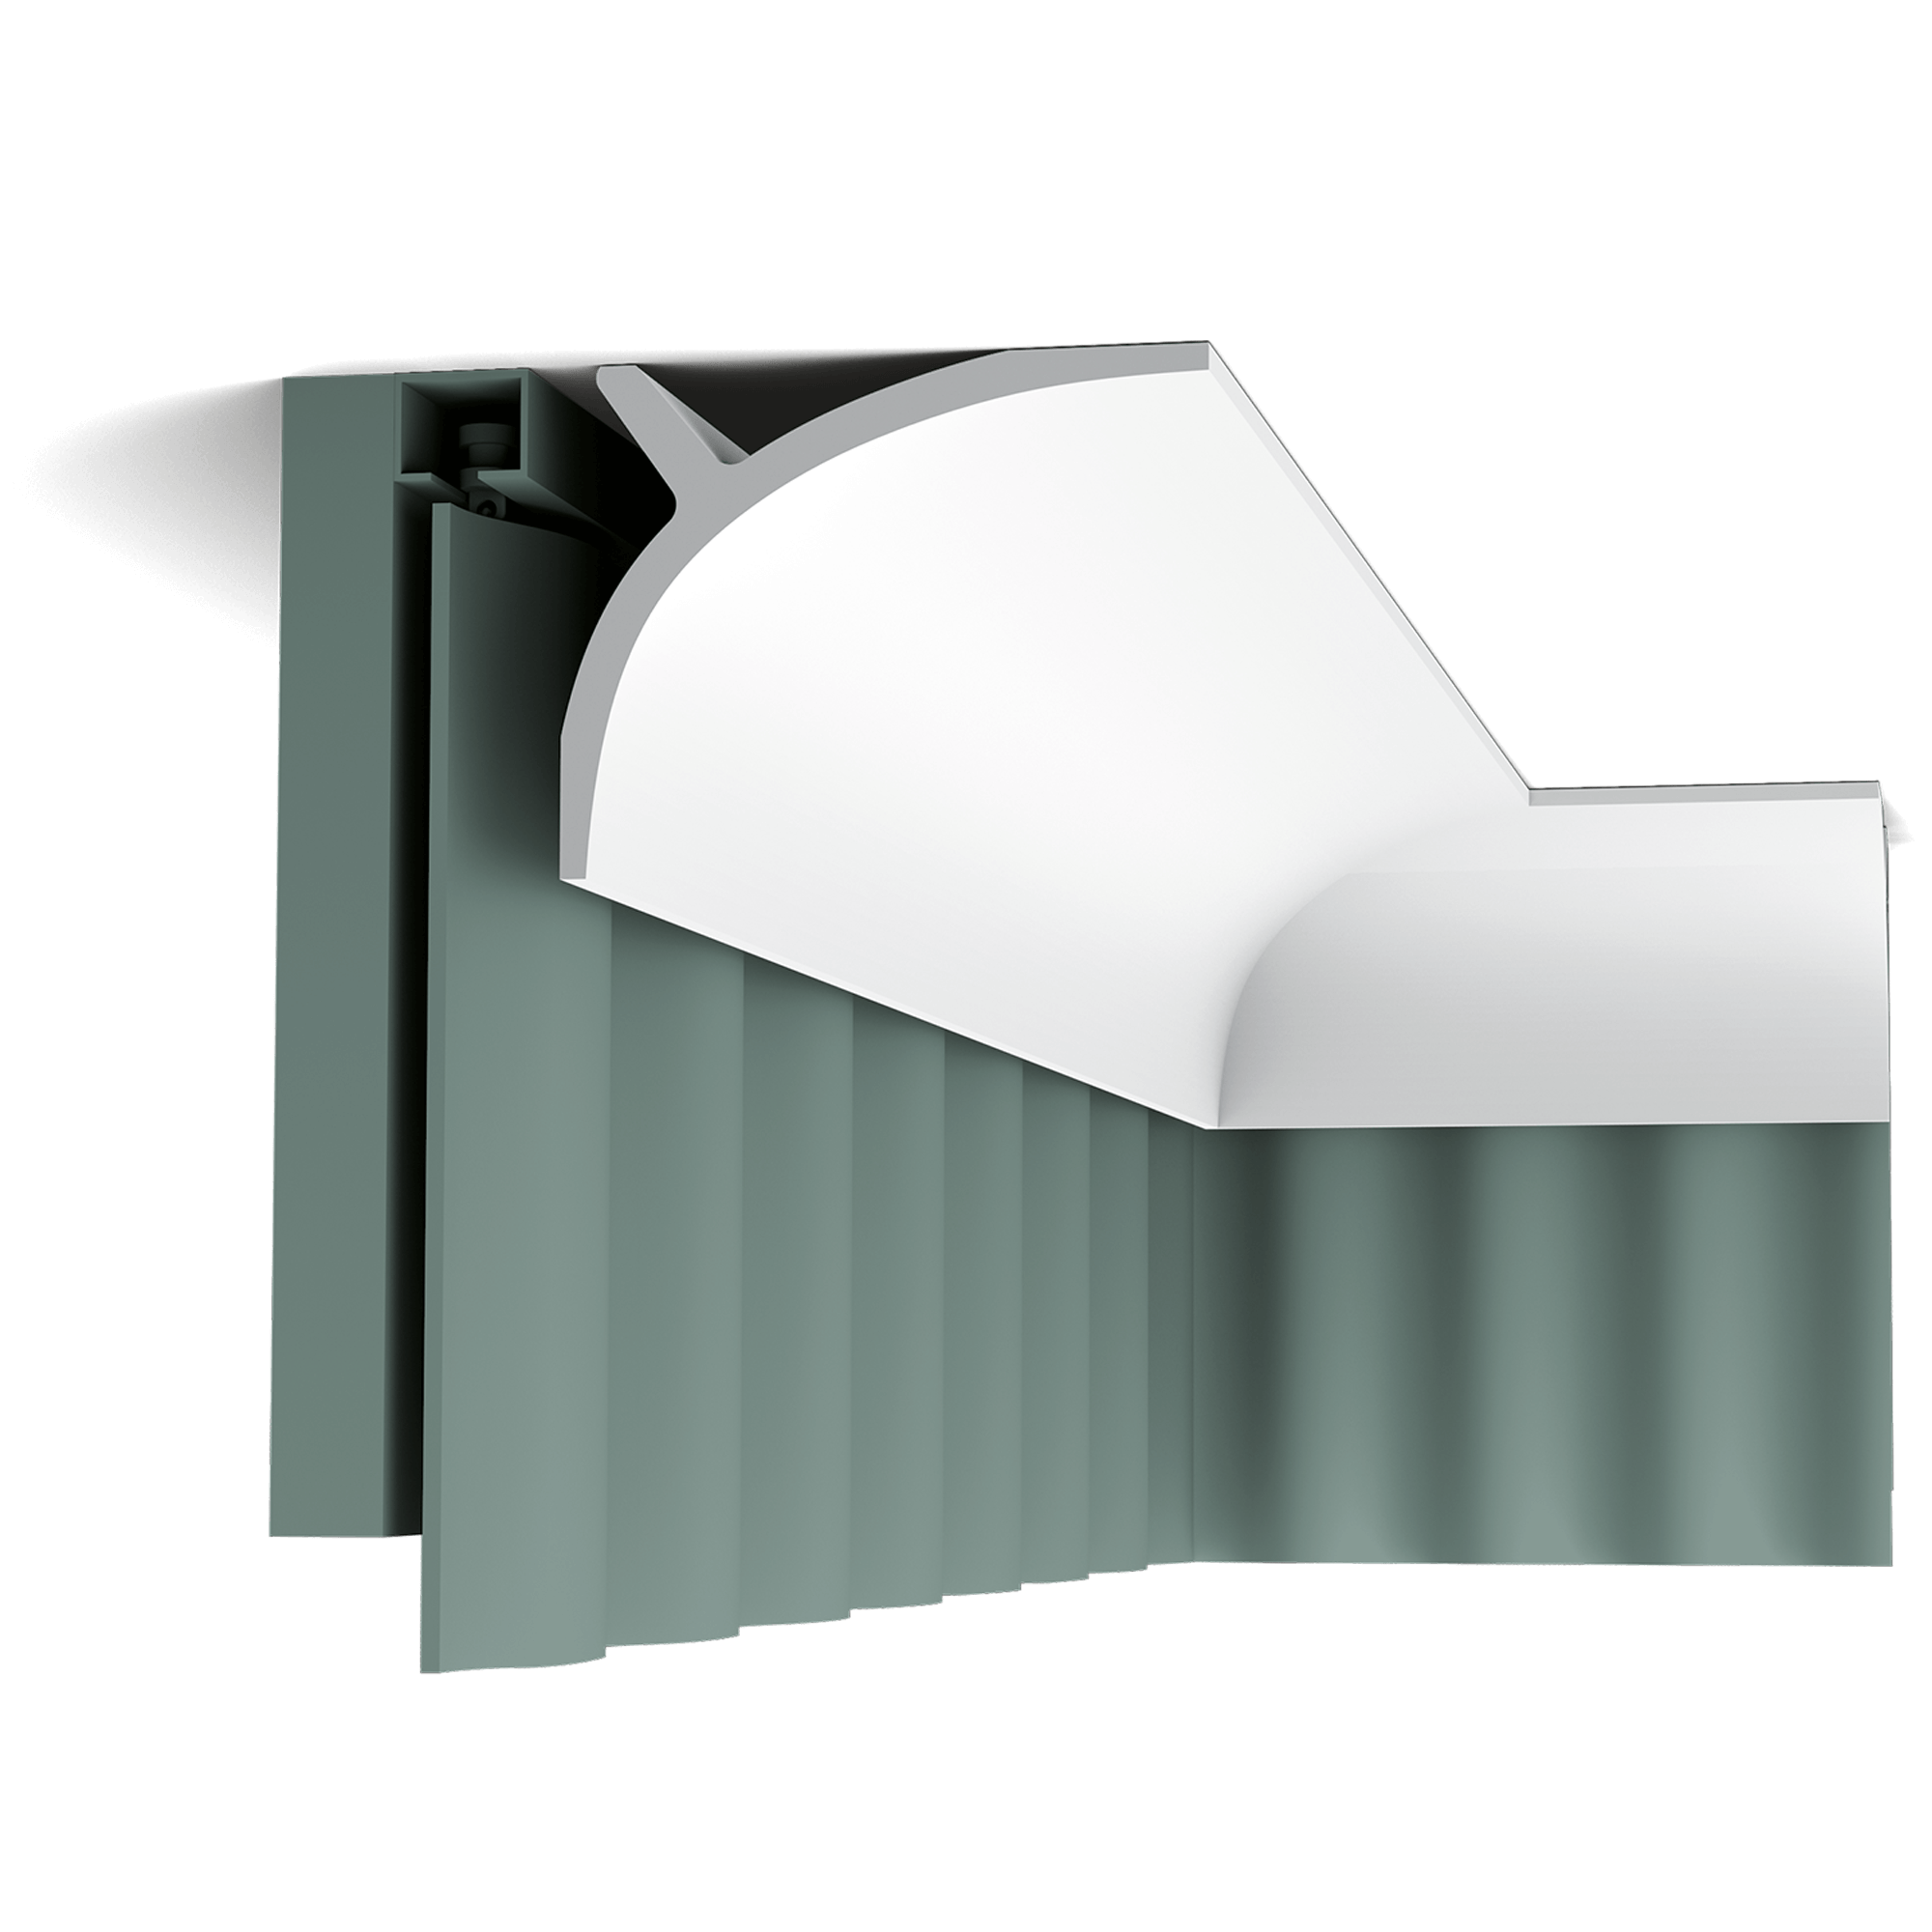 c991 curtain profile ef29 A contemporary cornice moulding with multiple applications. The additional installation bracket allows this profile to conceal curtain systems seamlessly. Designed by Ulf Moritz.